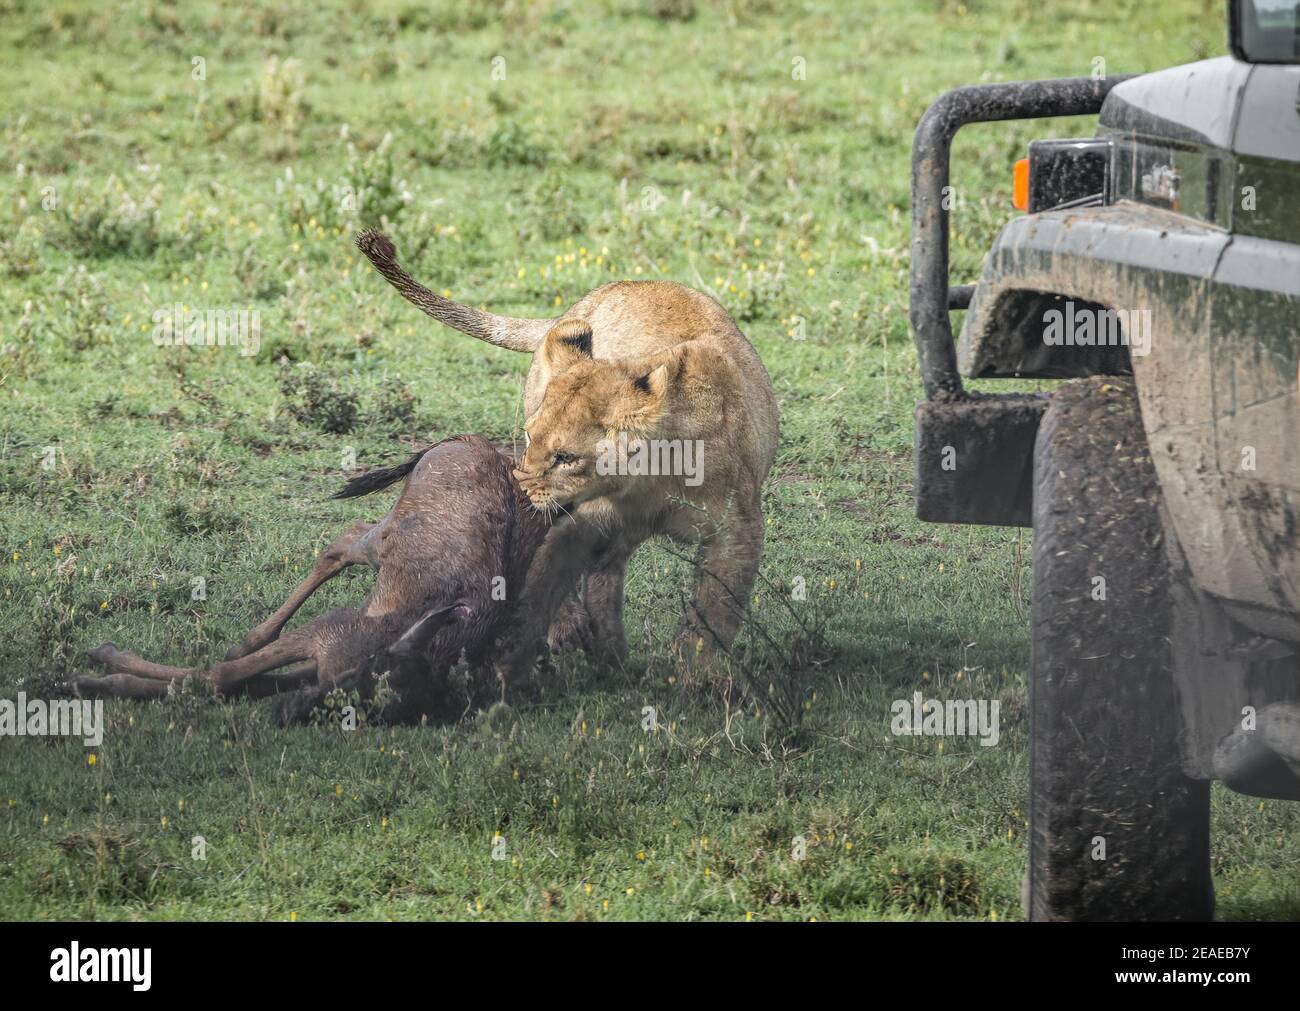 Two junvenile lions learning to hunt right next to a safari tourist vehicle by playing with a dead wildebeest calf in Africa Stock Photo